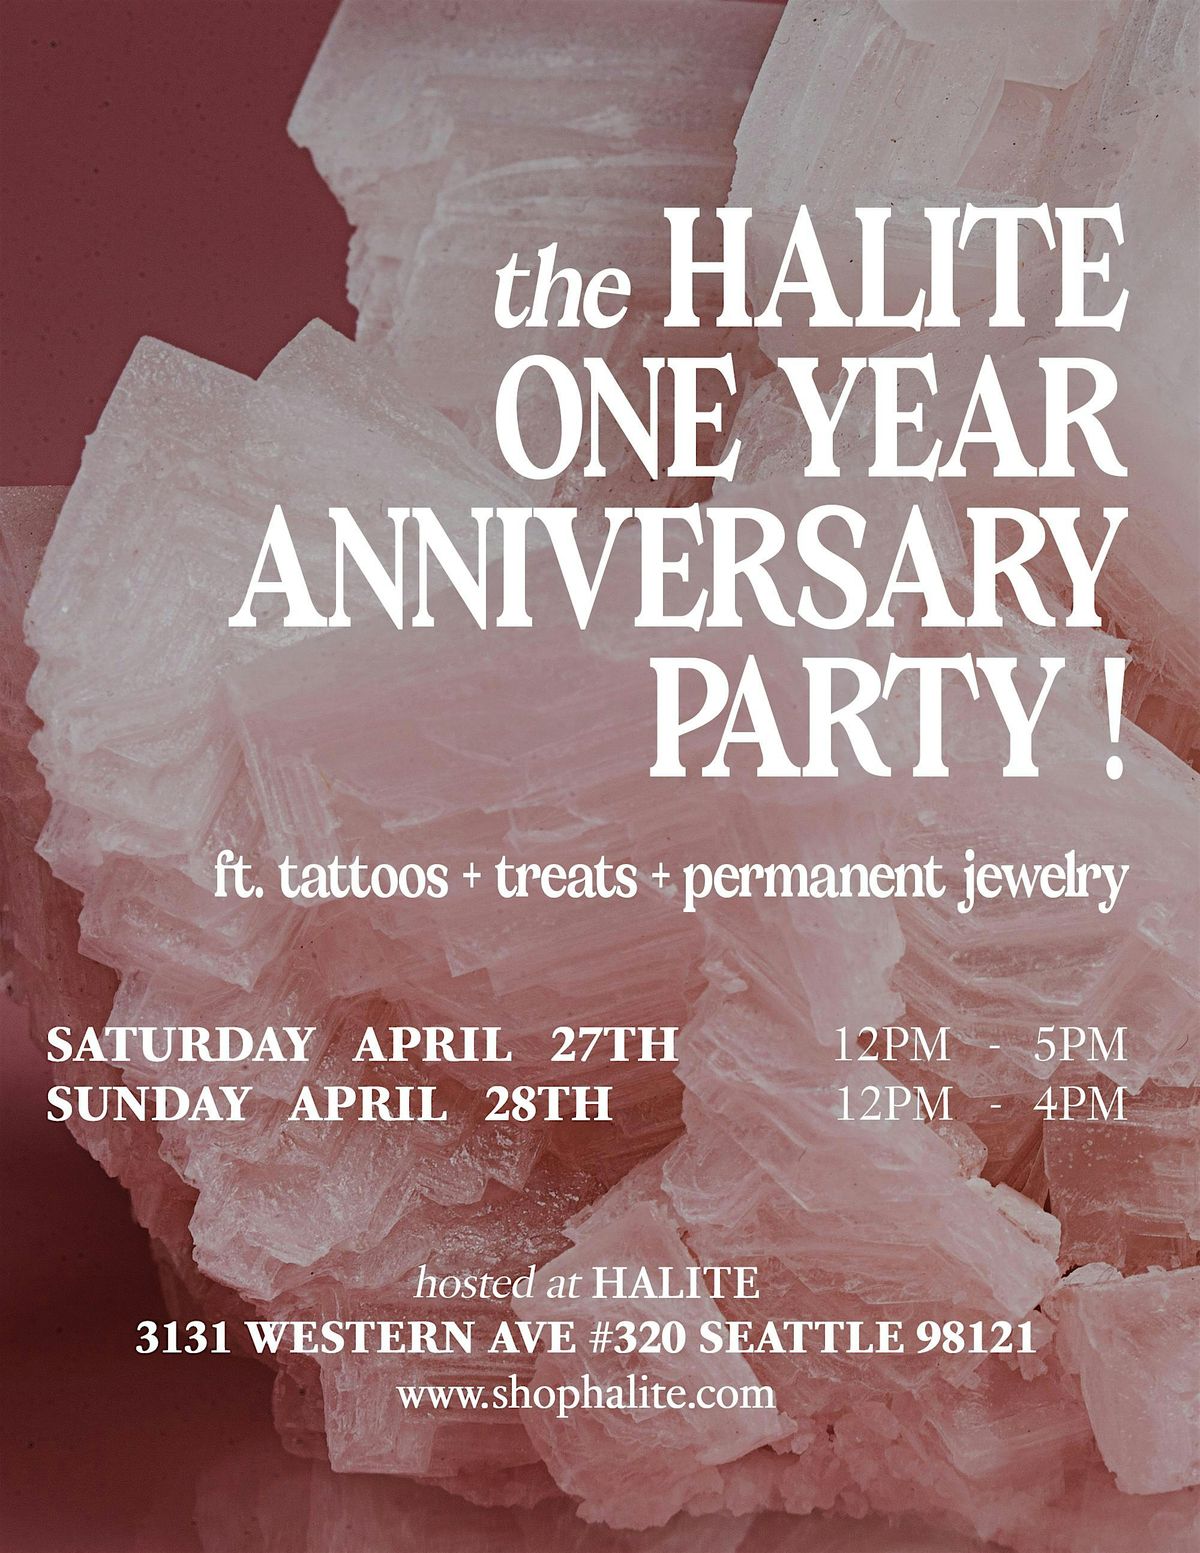 the Halite ONE YEAR Anniversary party!